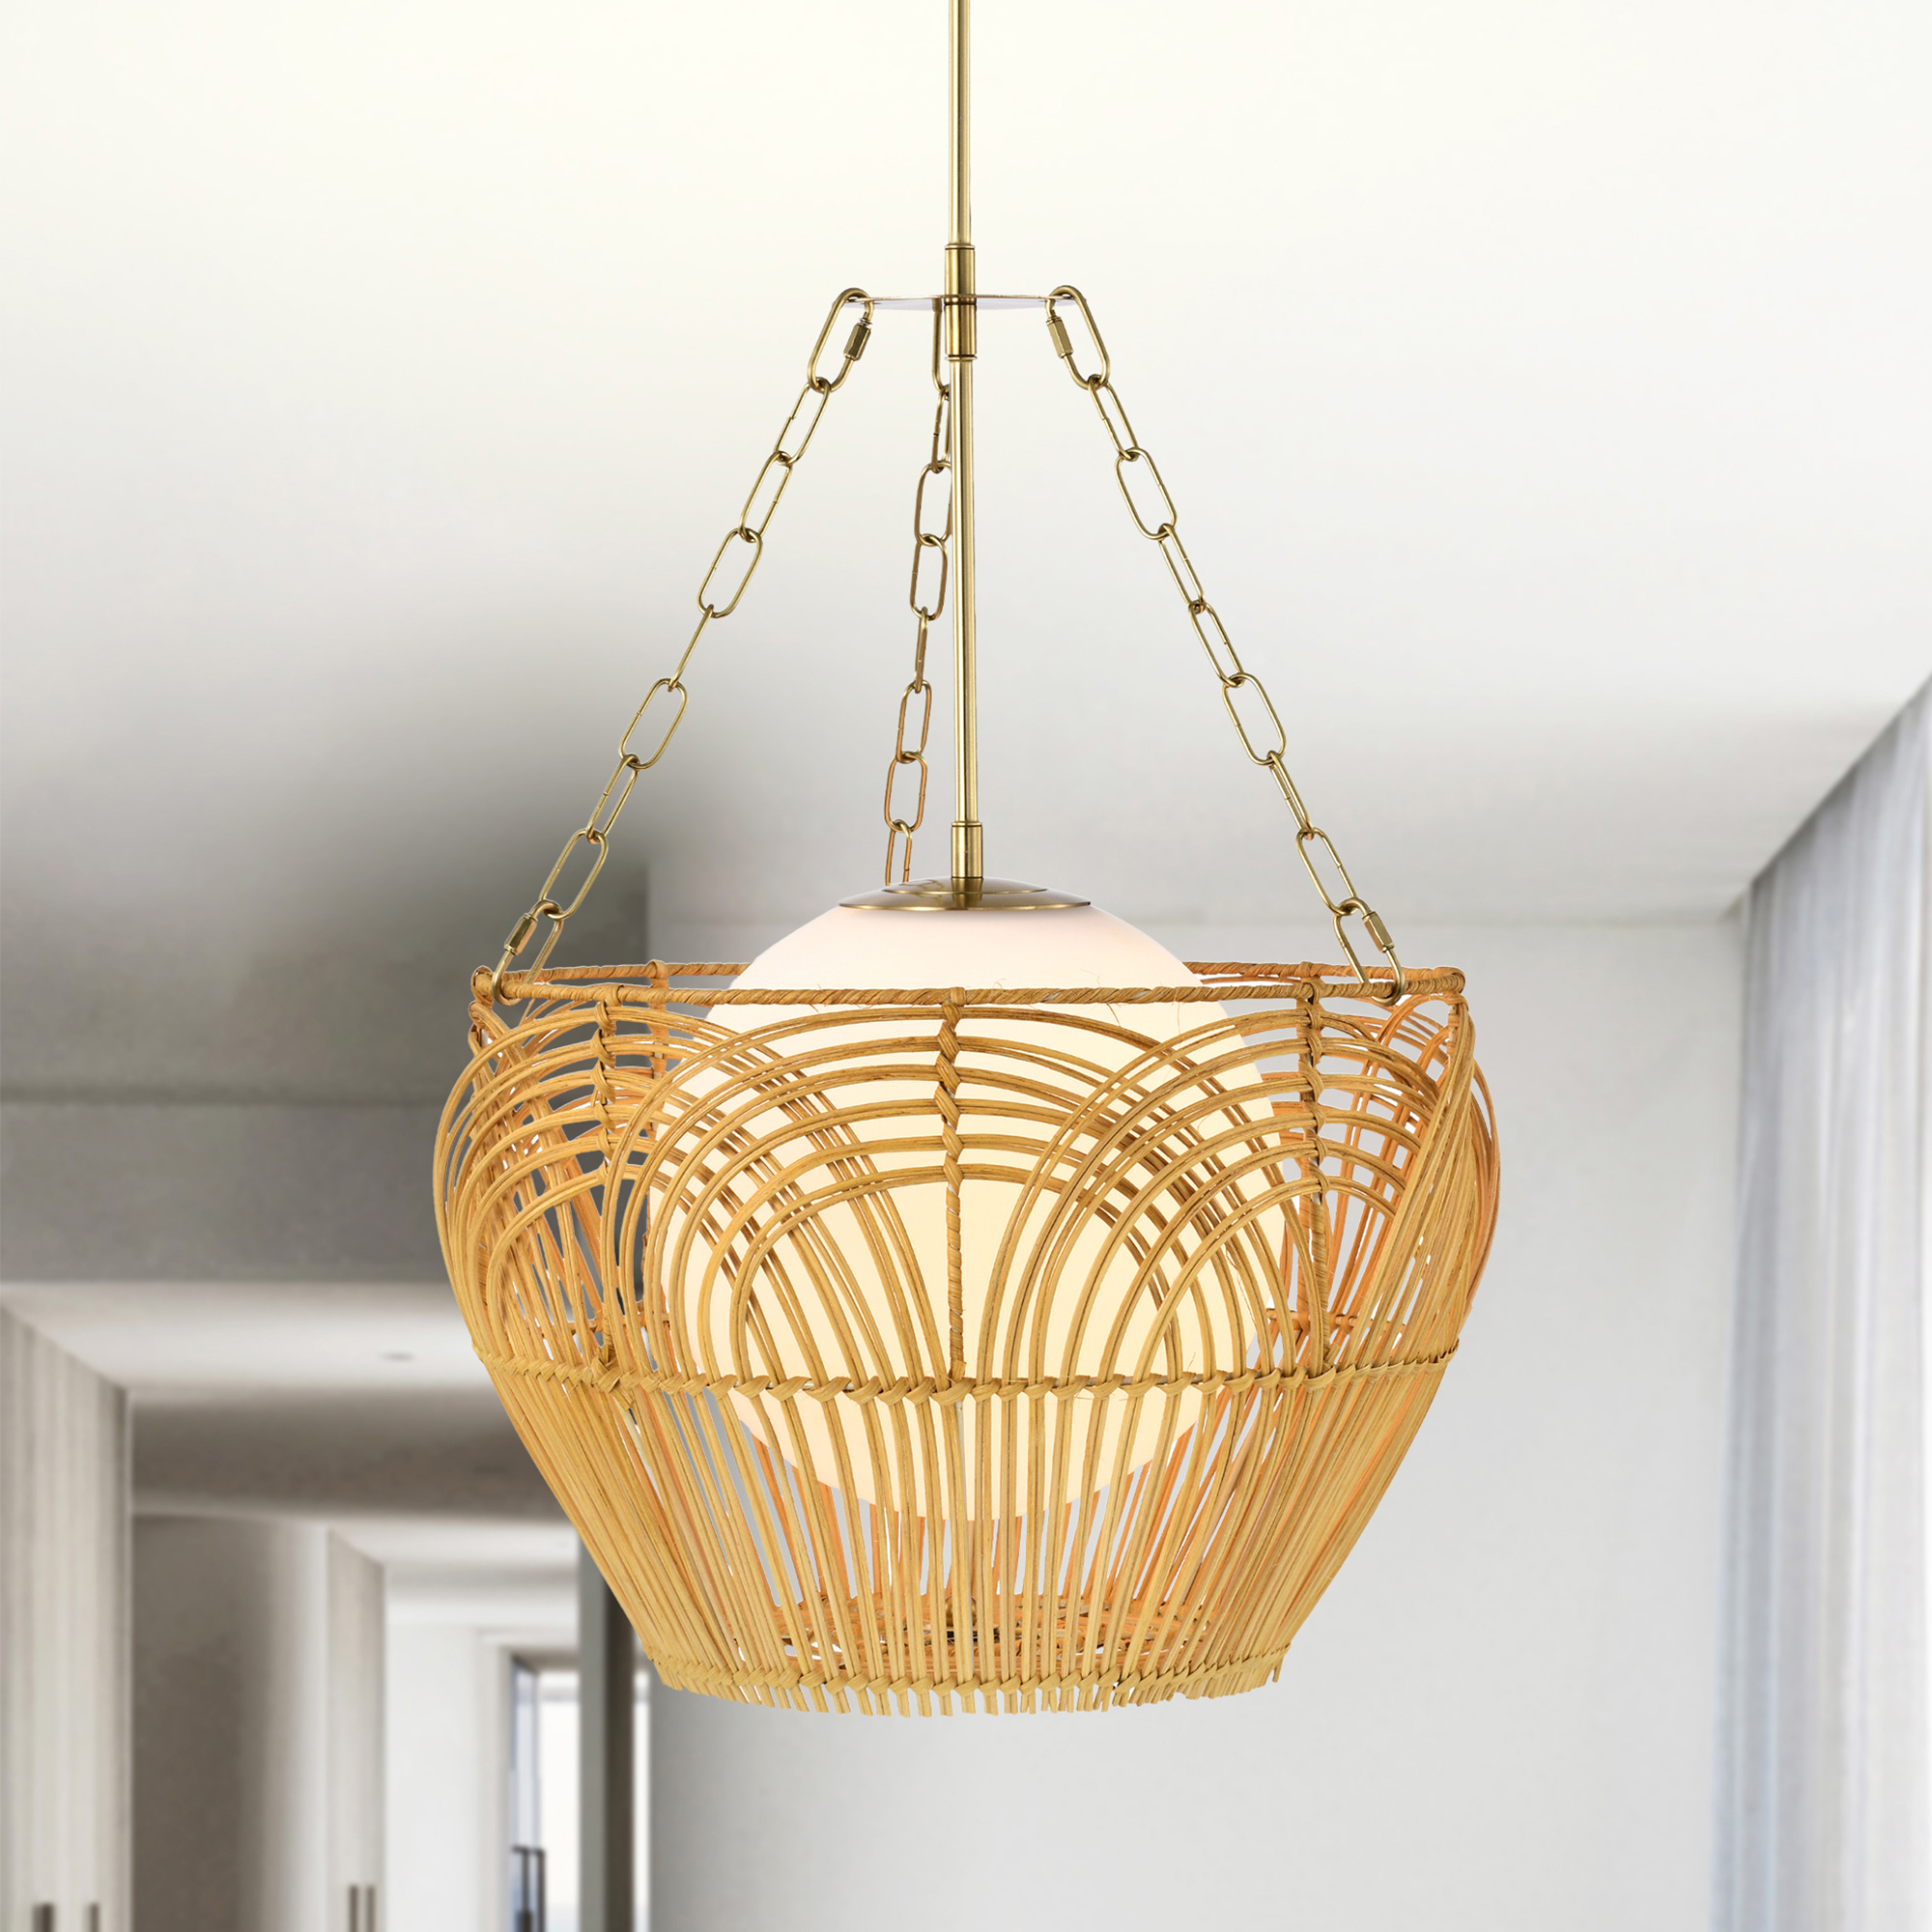 Caddie 15 in. 1-Light Indoor Brass and Woven Rattan Finish Pendant with Light Kit